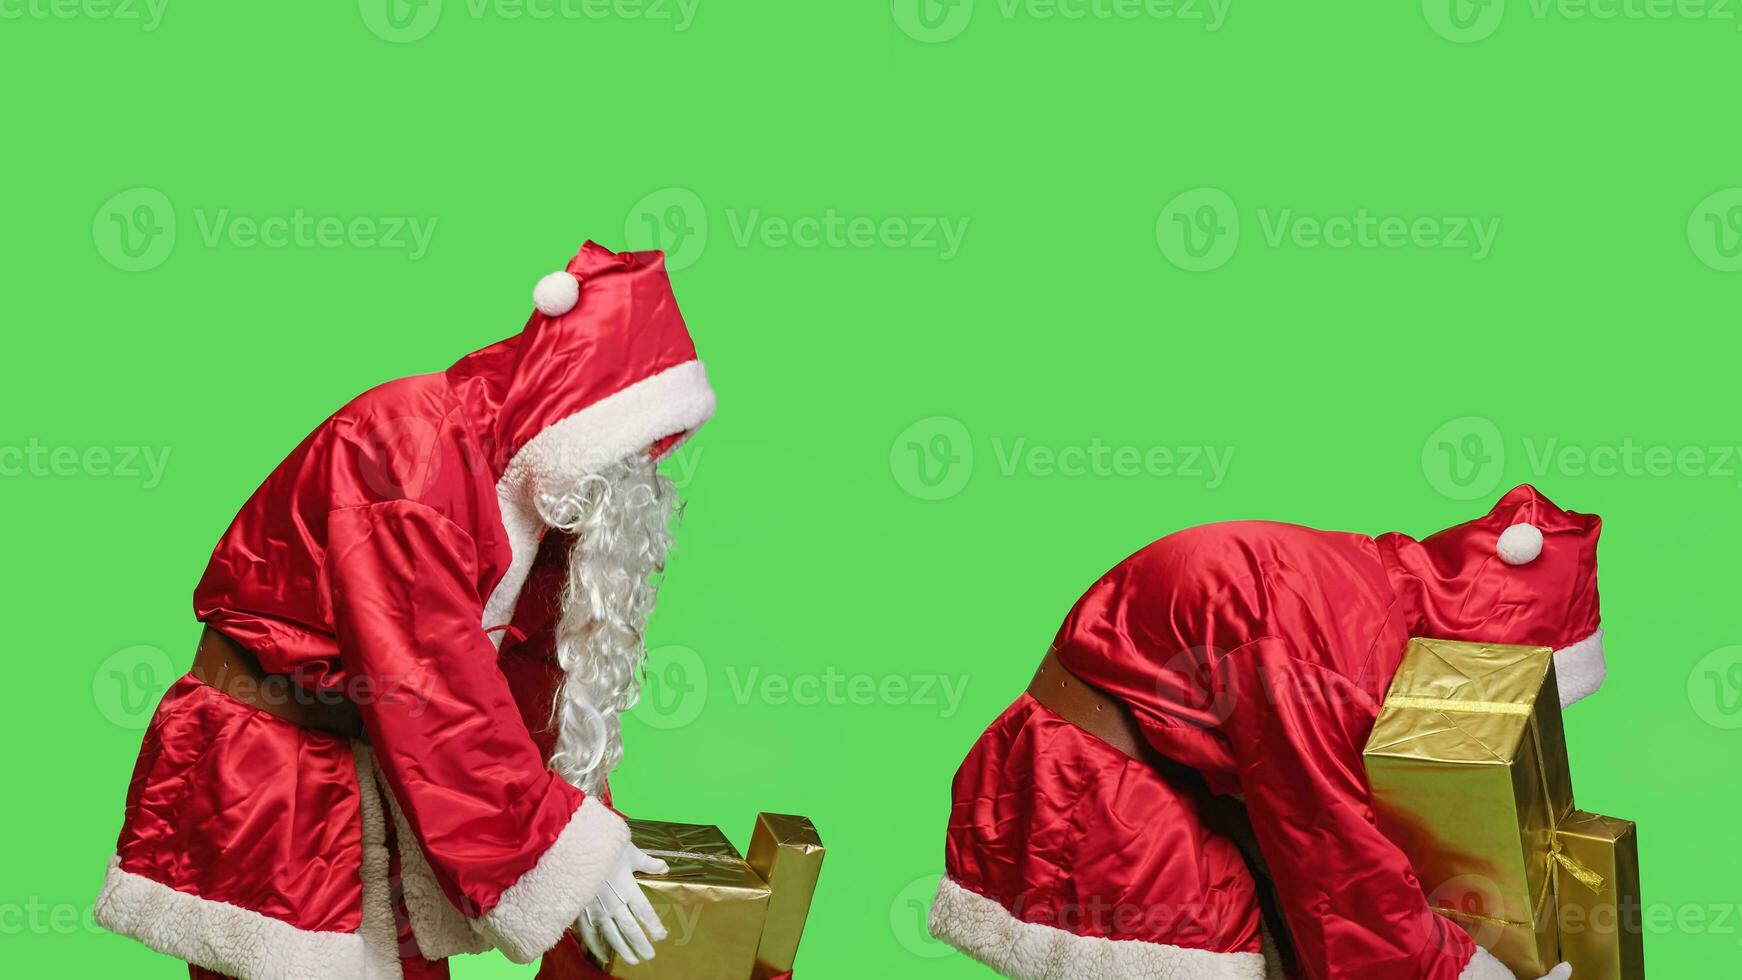 Man portraying santa with bag full of gifts and presents, carrying boxes decorated with ribbons for children around the globe. Father christmas spreading holiday spirit, greenscreen. photo